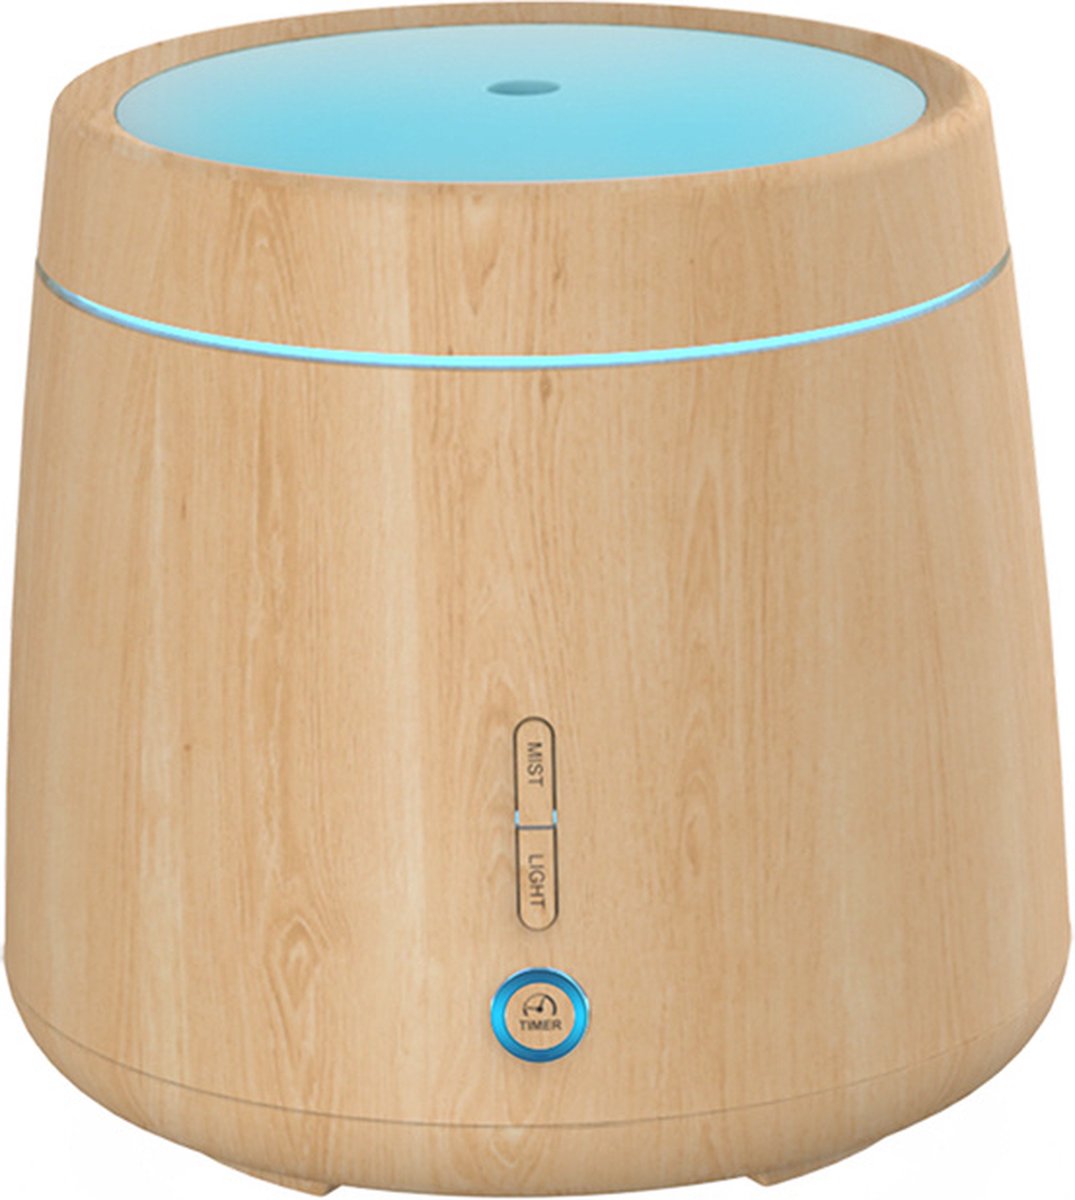 Ultransmit Aroma Diffuser Eve Hout